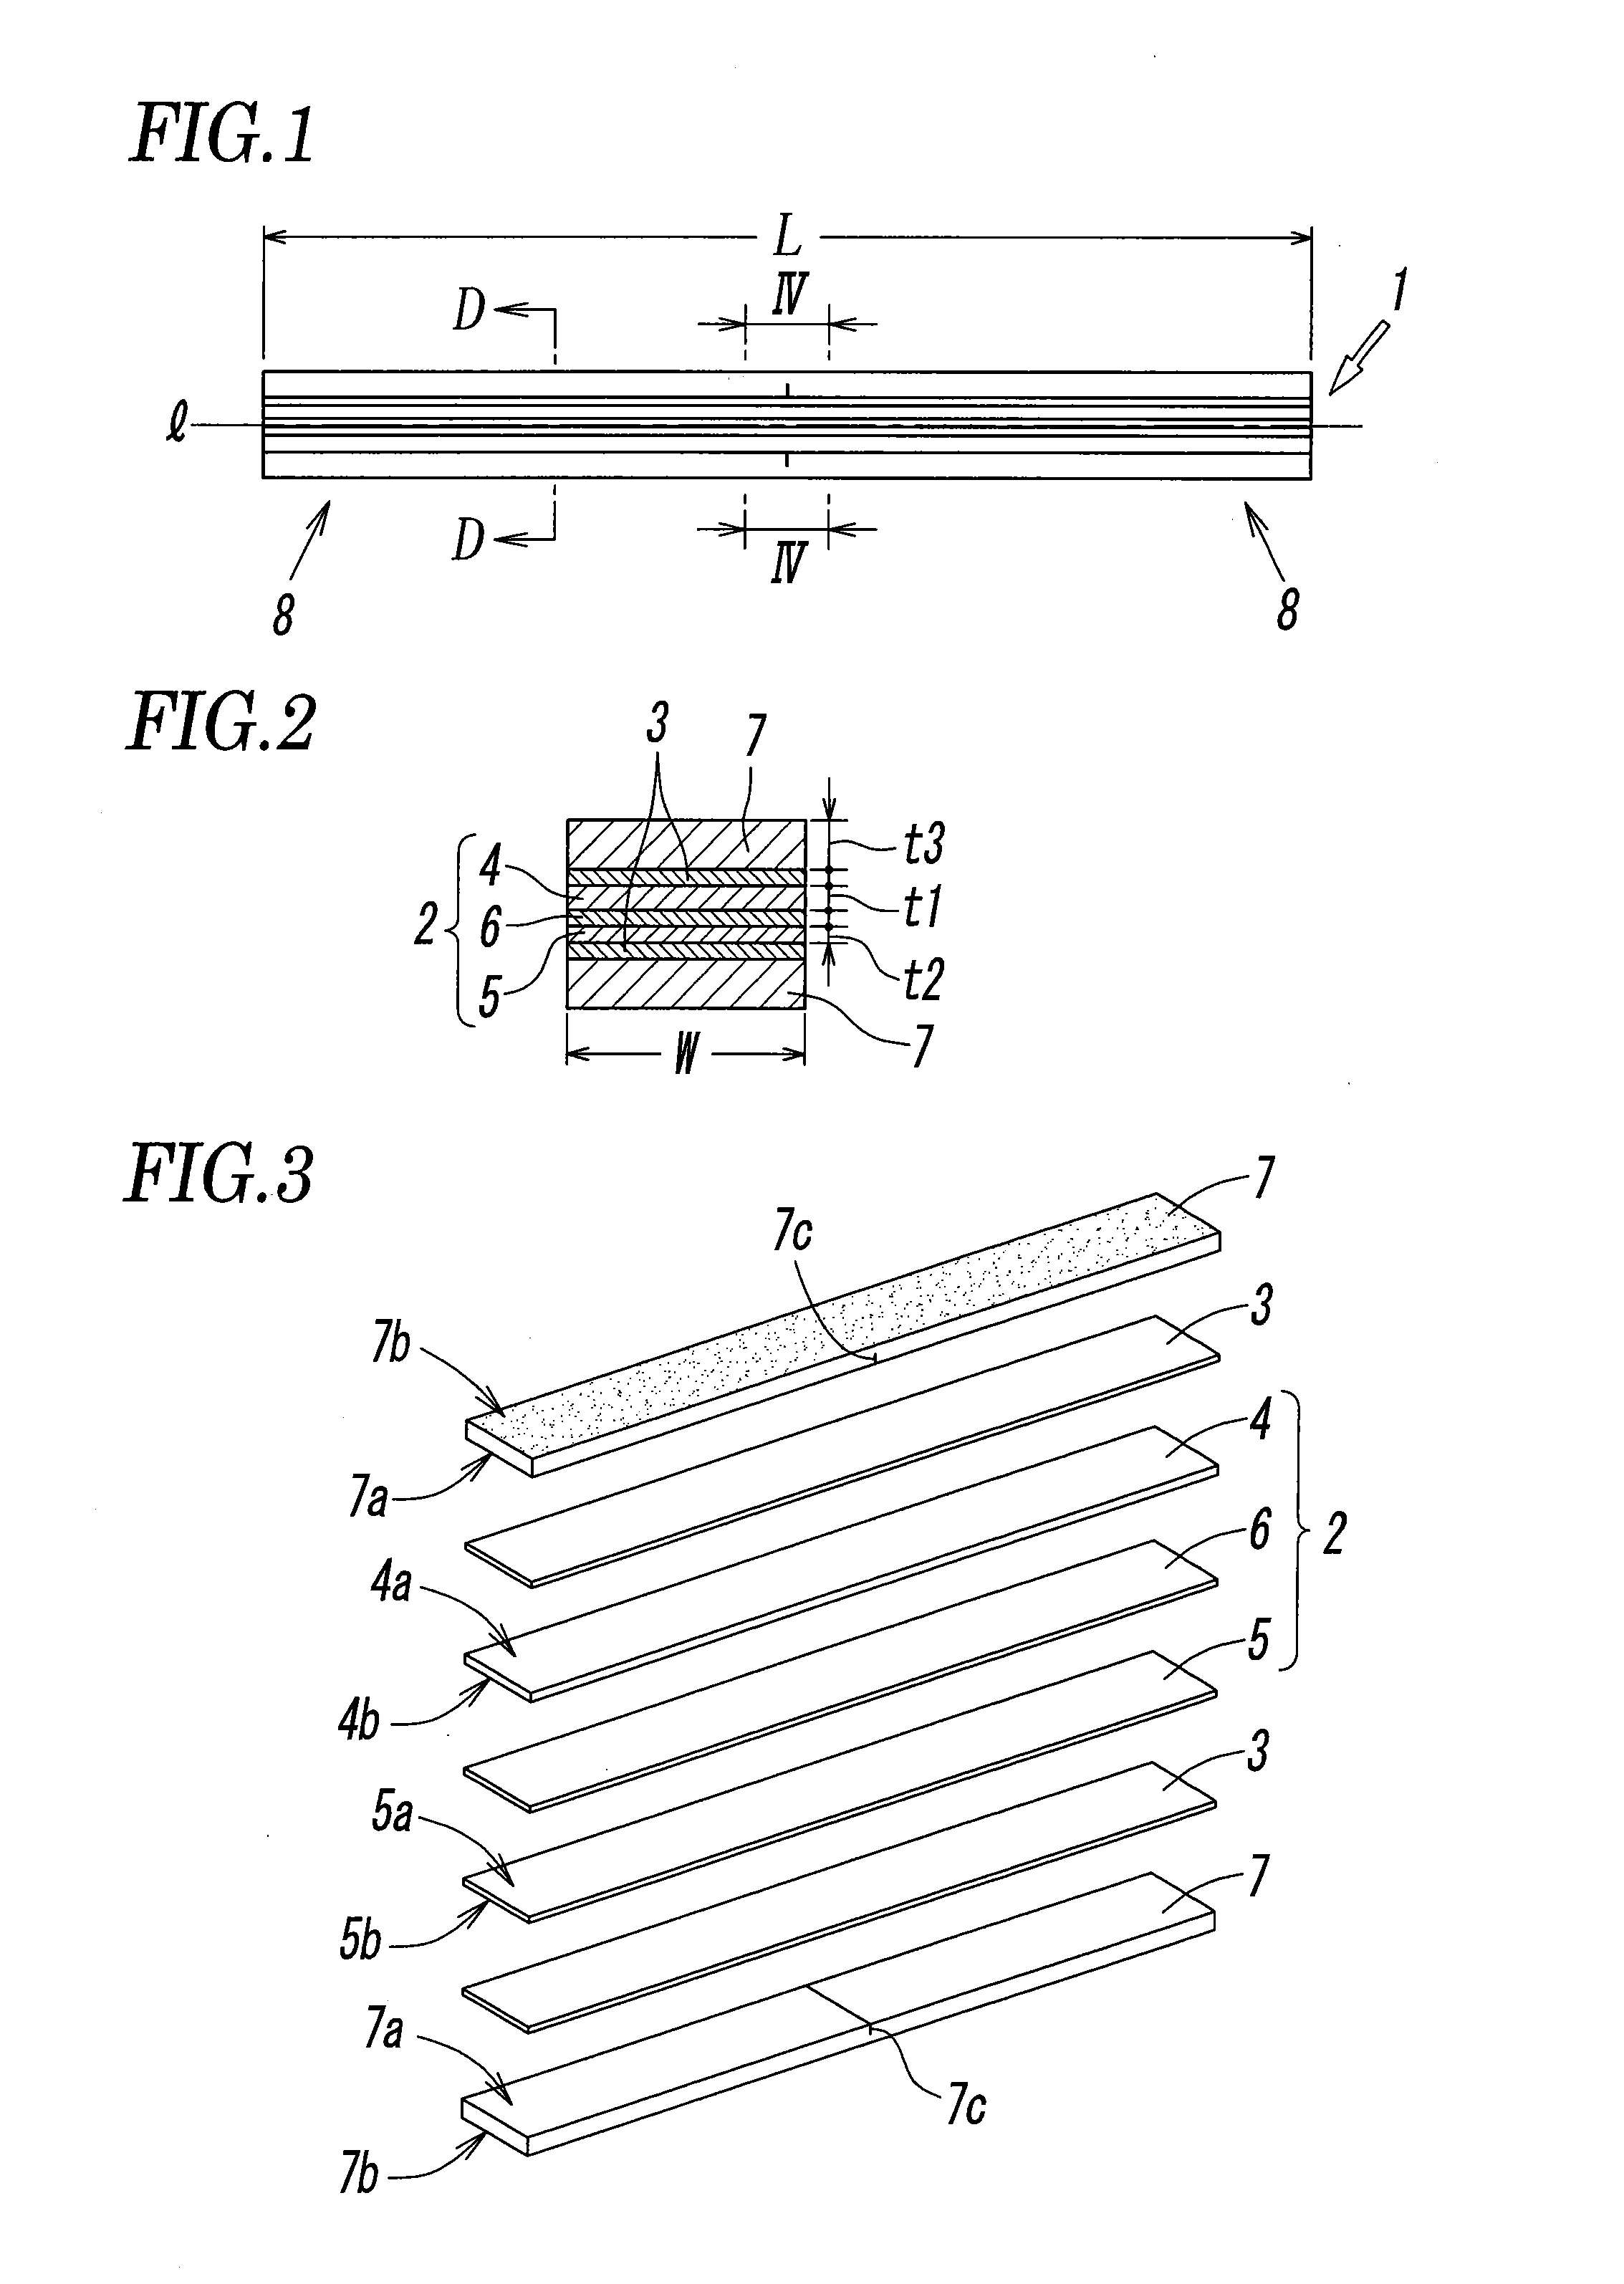 Double eyelid formation tape, method for manufacturing same, and method for forming double eyelid using double eyelid formation tape